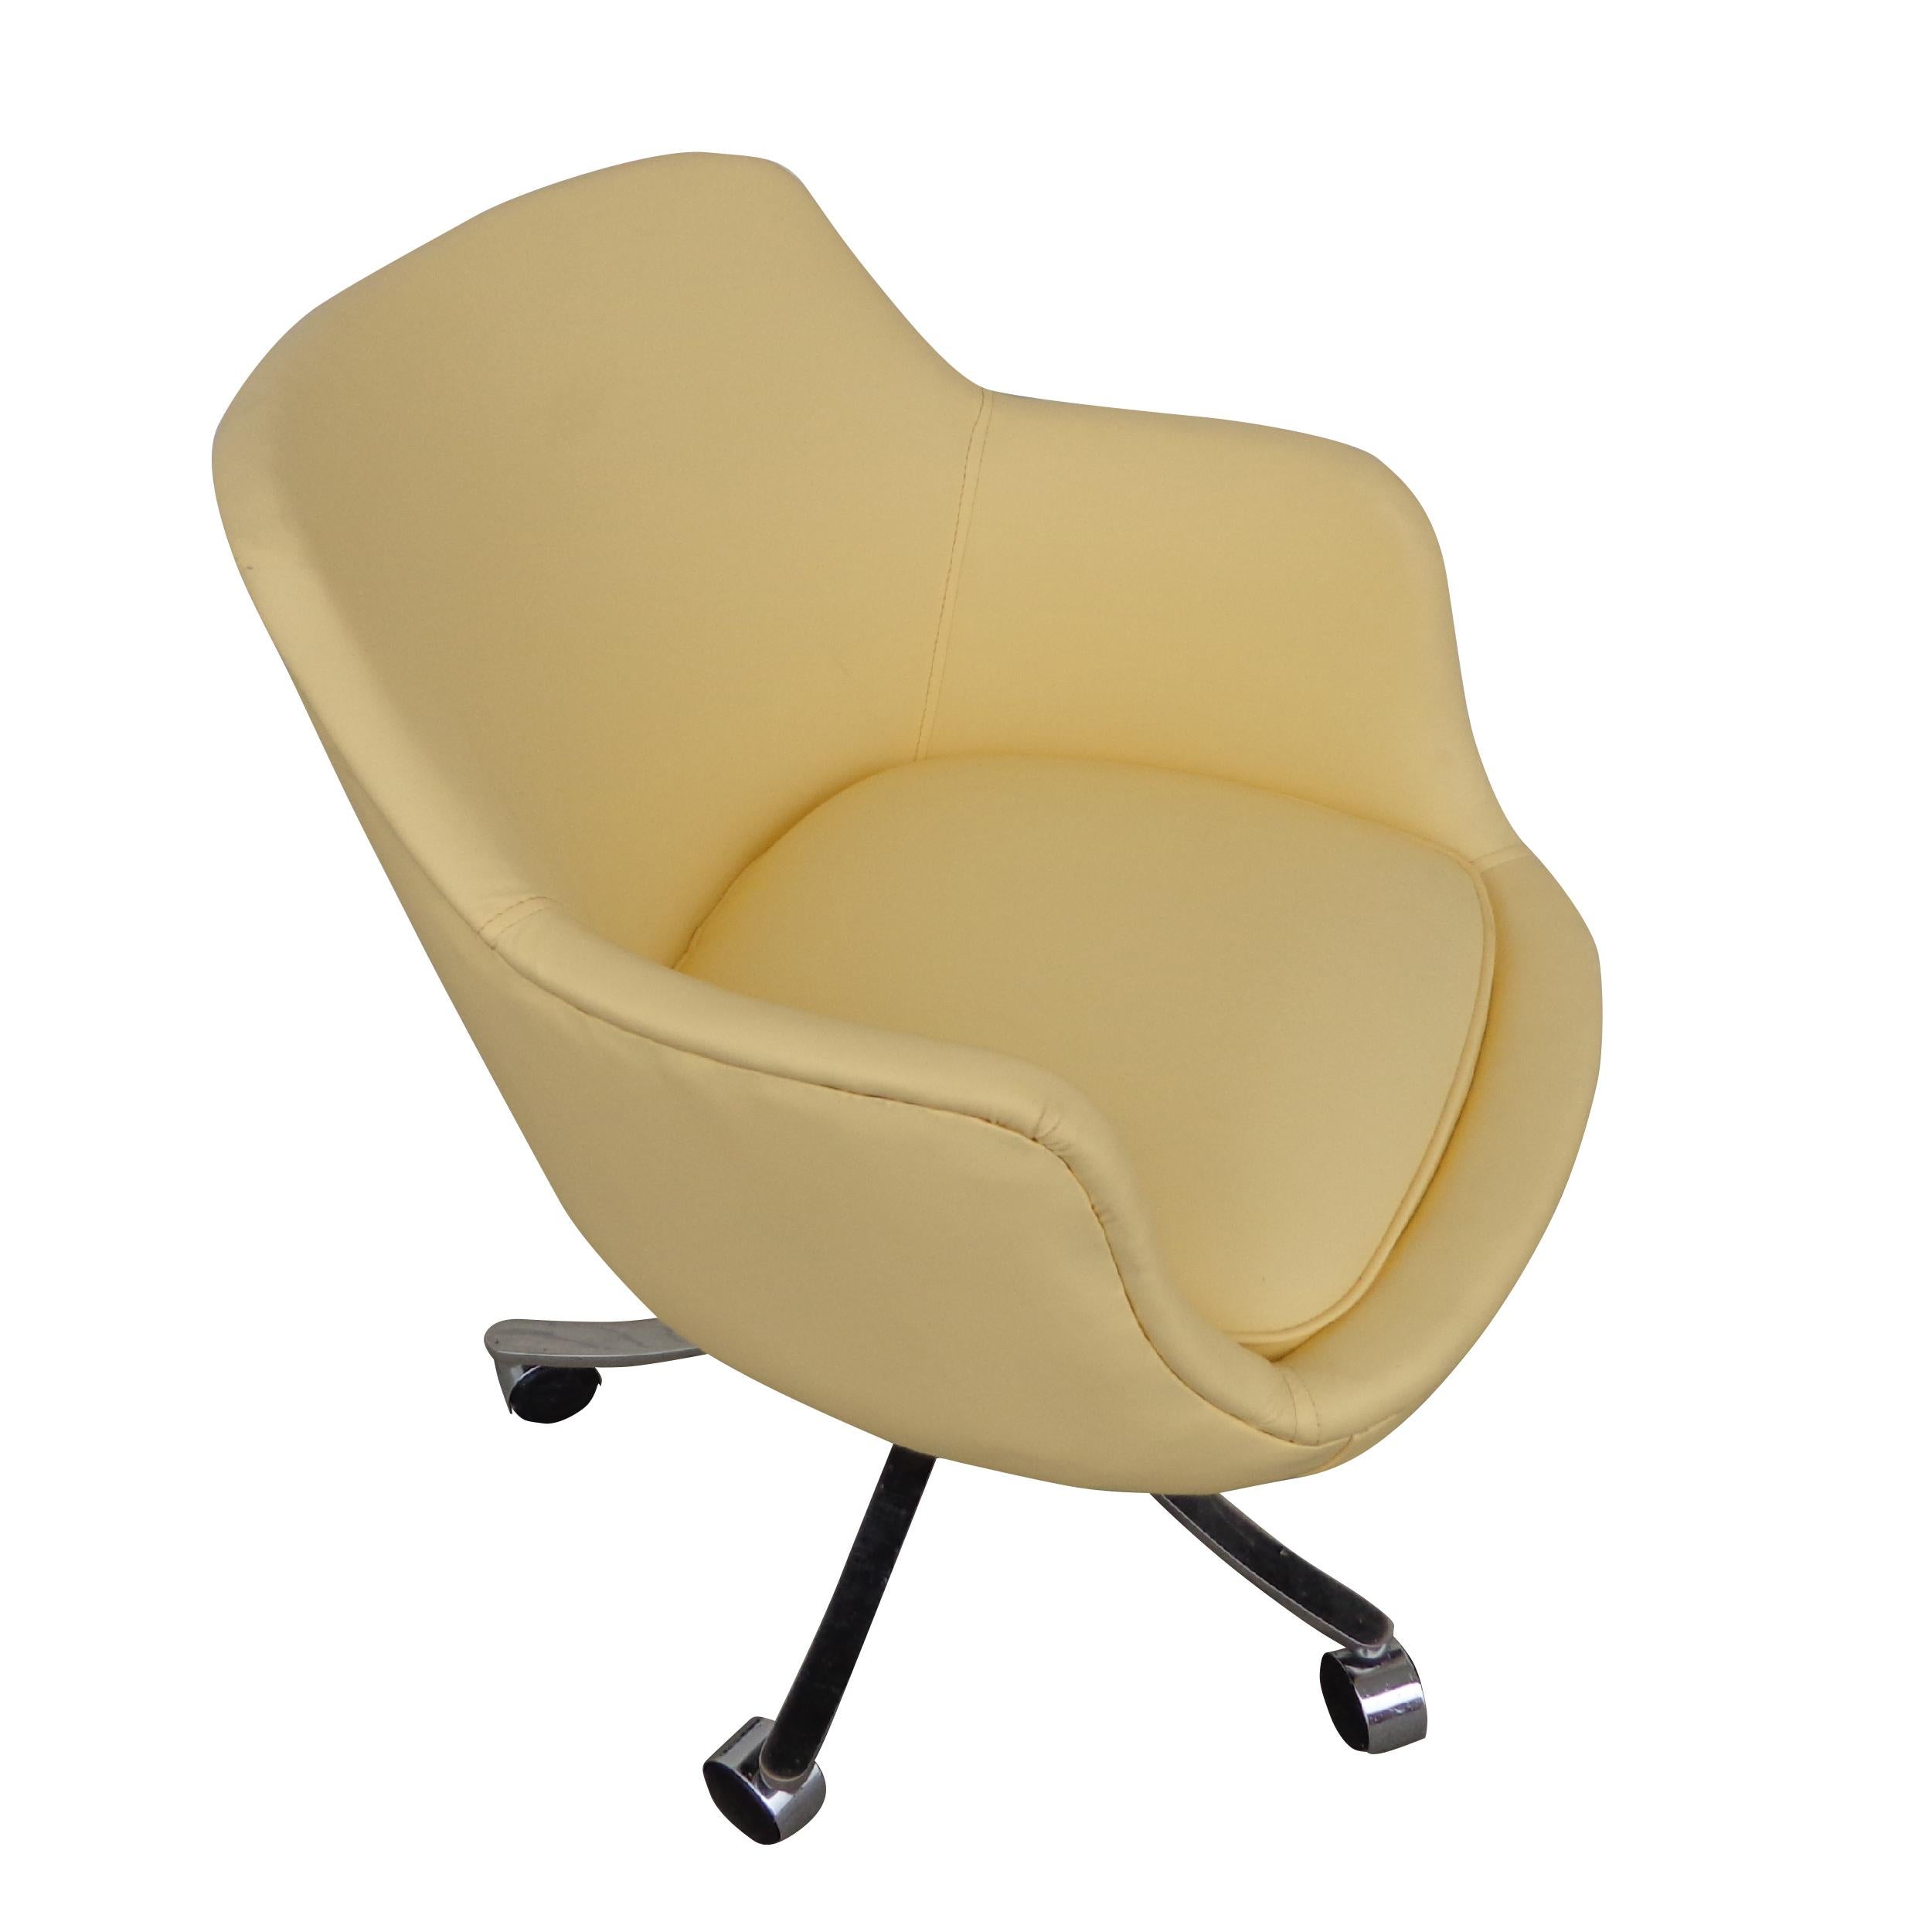 North American Vintage Zographos Alpha Bucket Chair Restored with New Vegan Ultra Leather For Sale